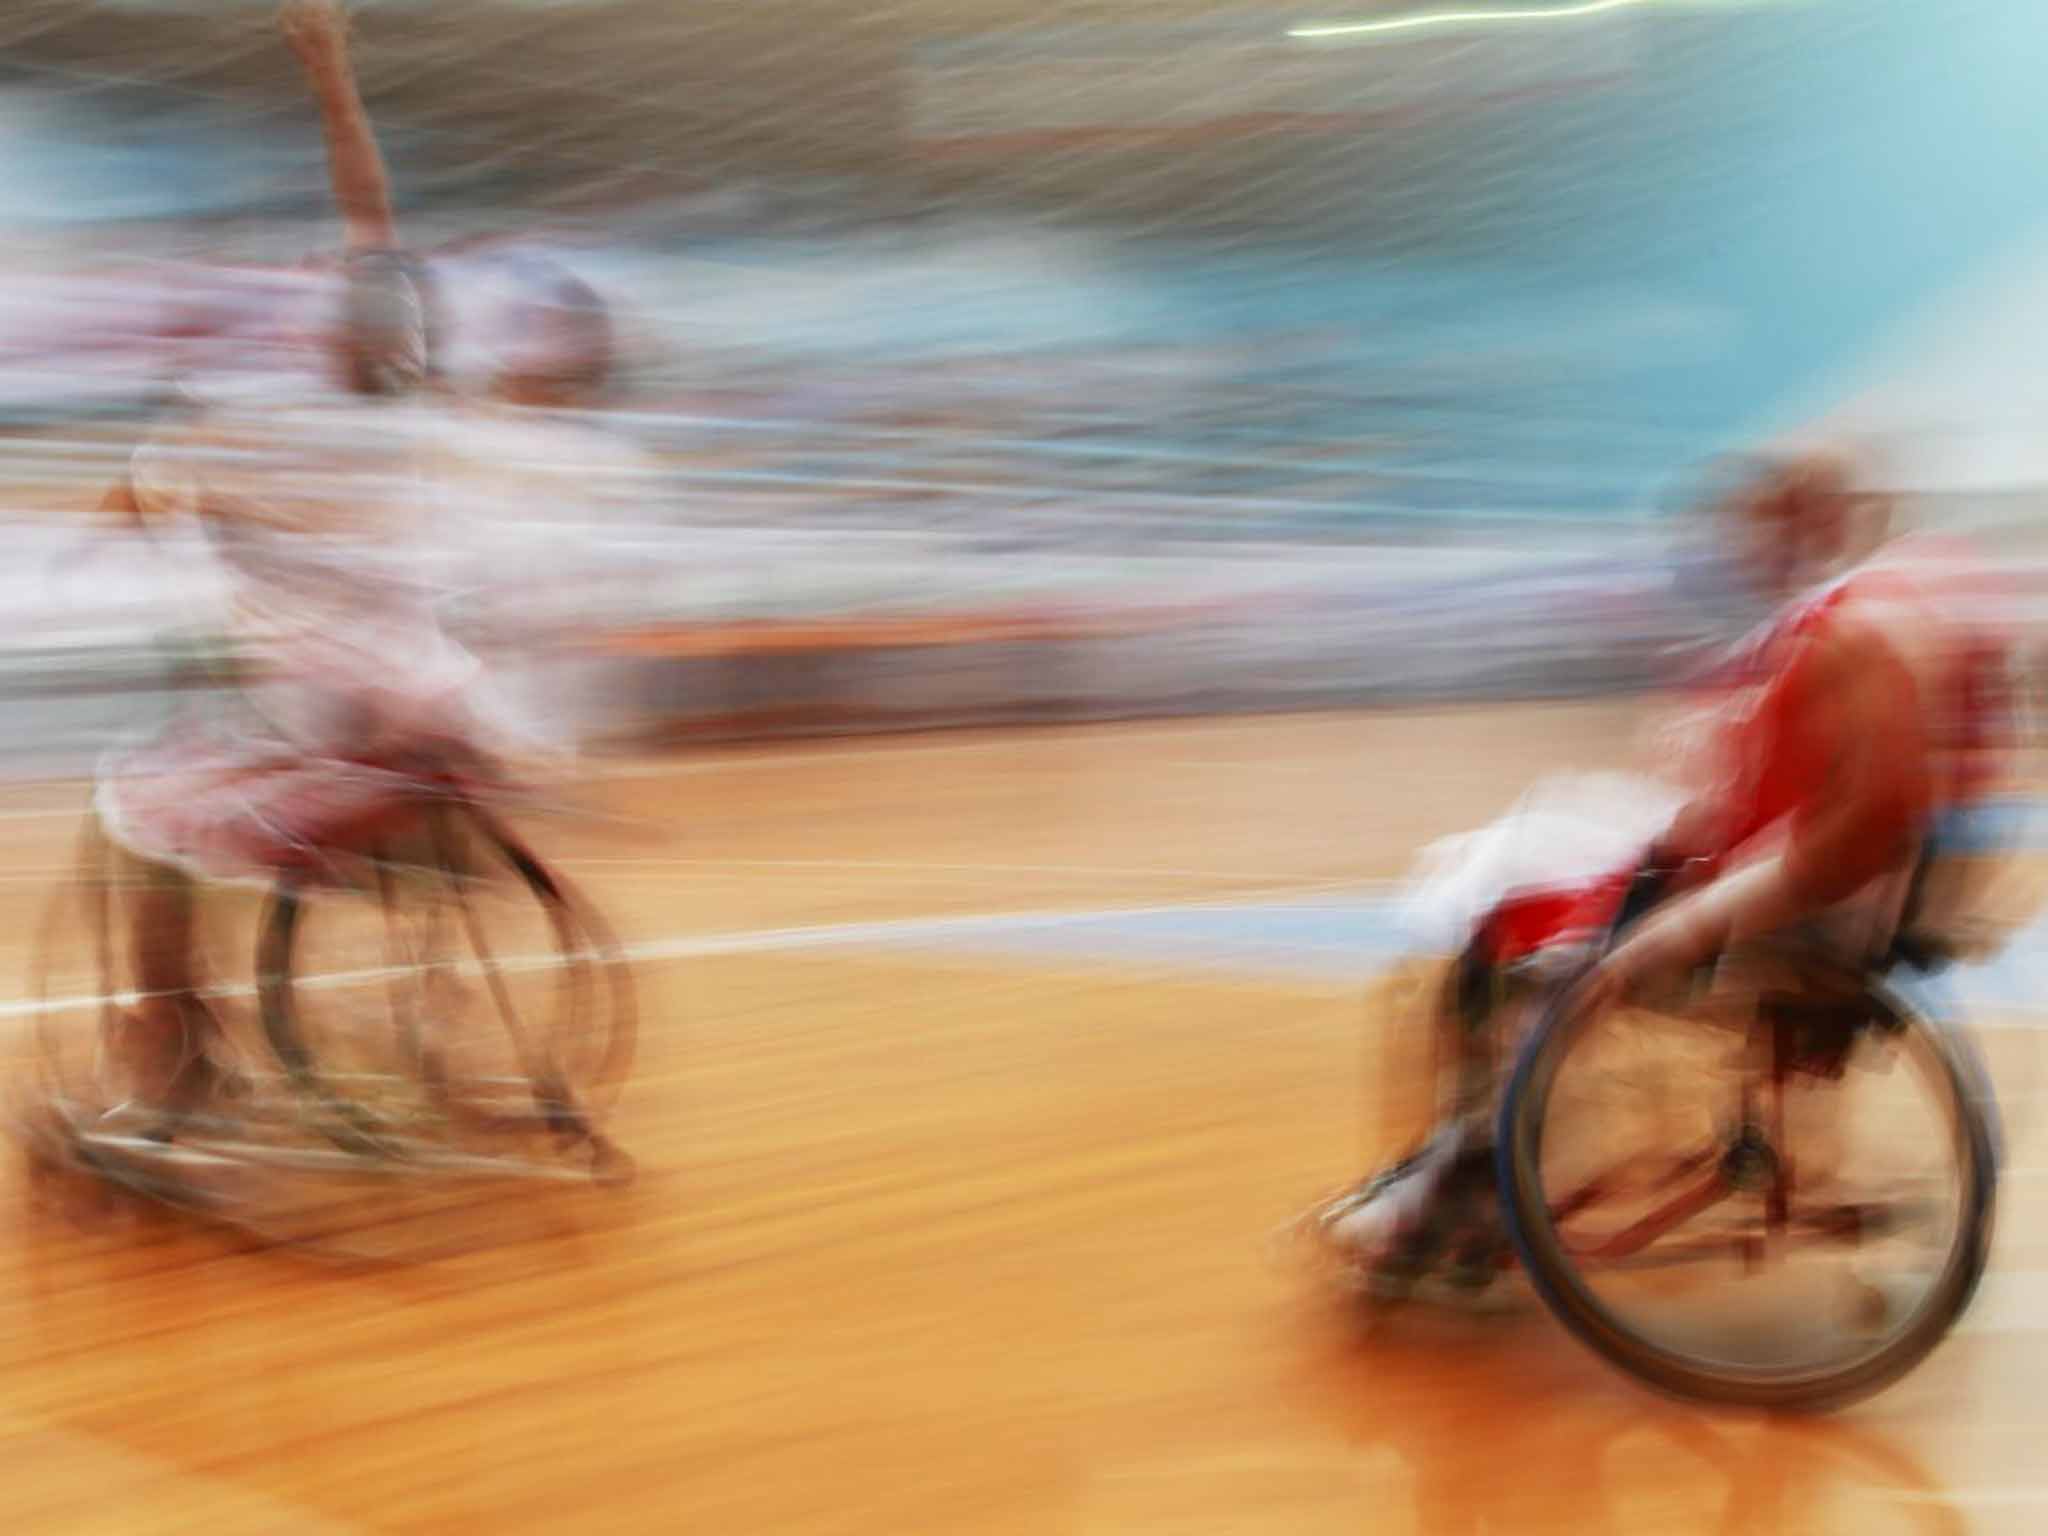 Wheelchair basketball was started in 1946 as rehab for war veterans